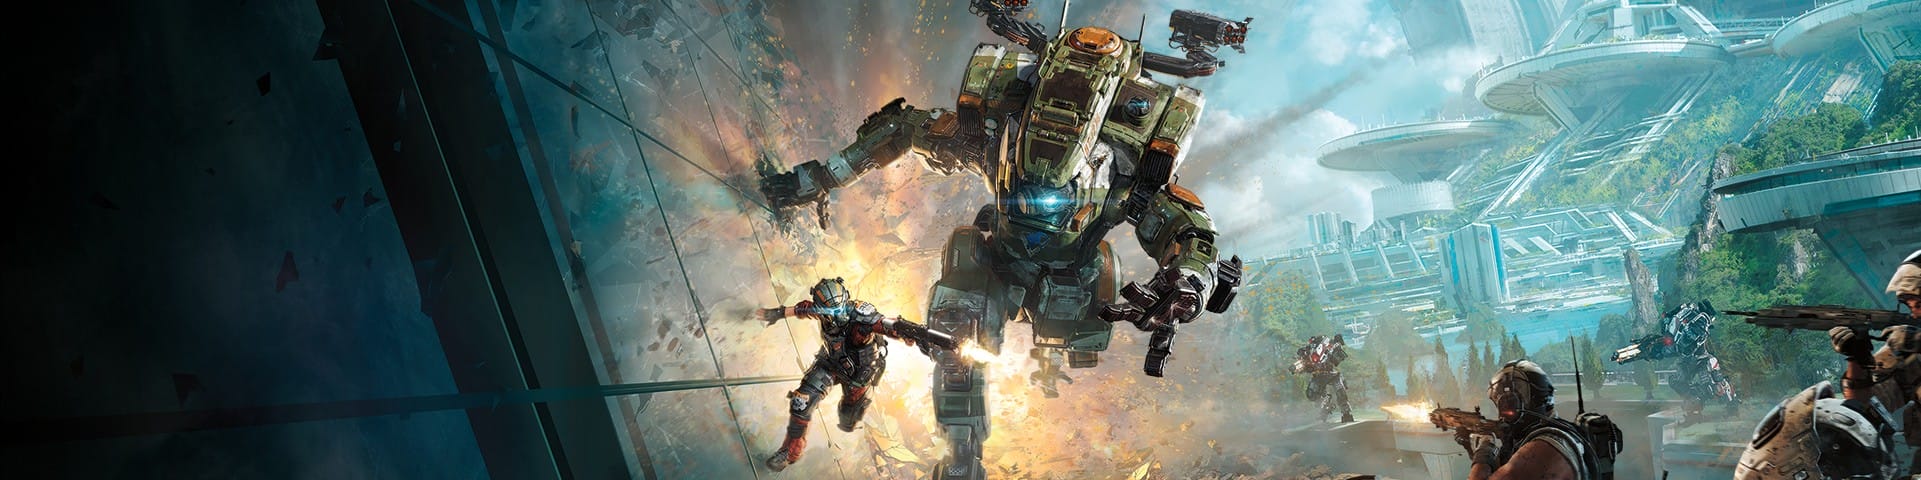 No New Titanfall Game in The Works Now